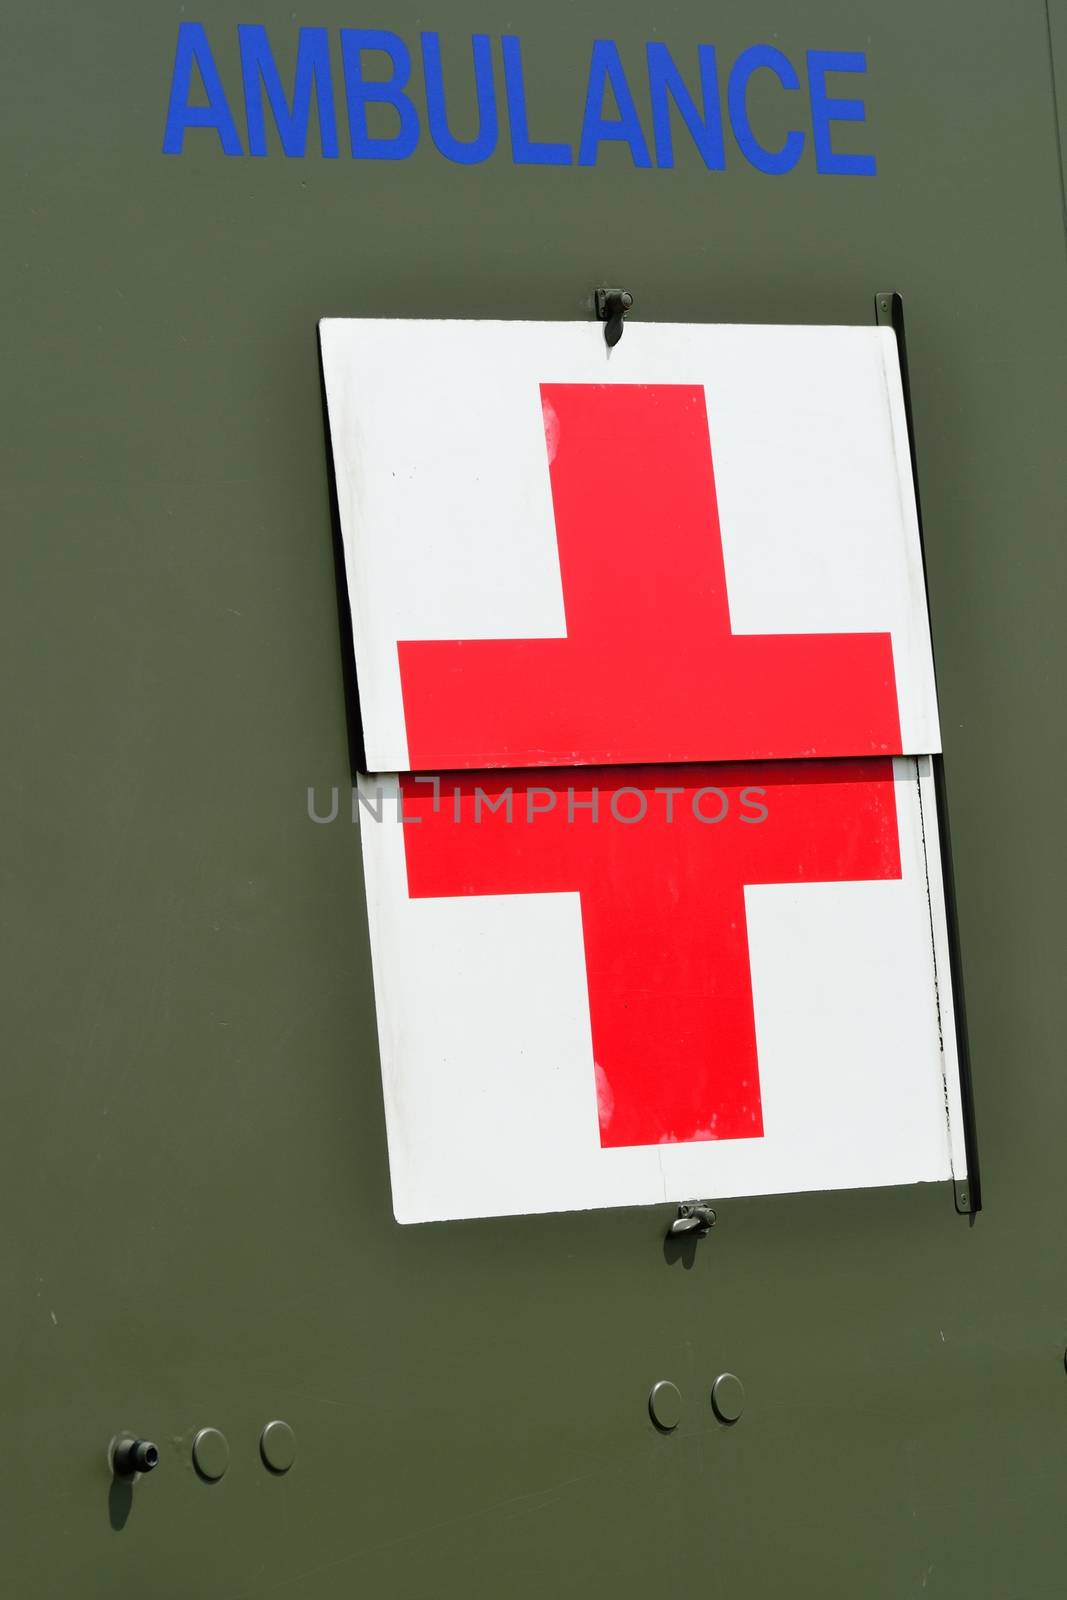 Military ambulance in close up